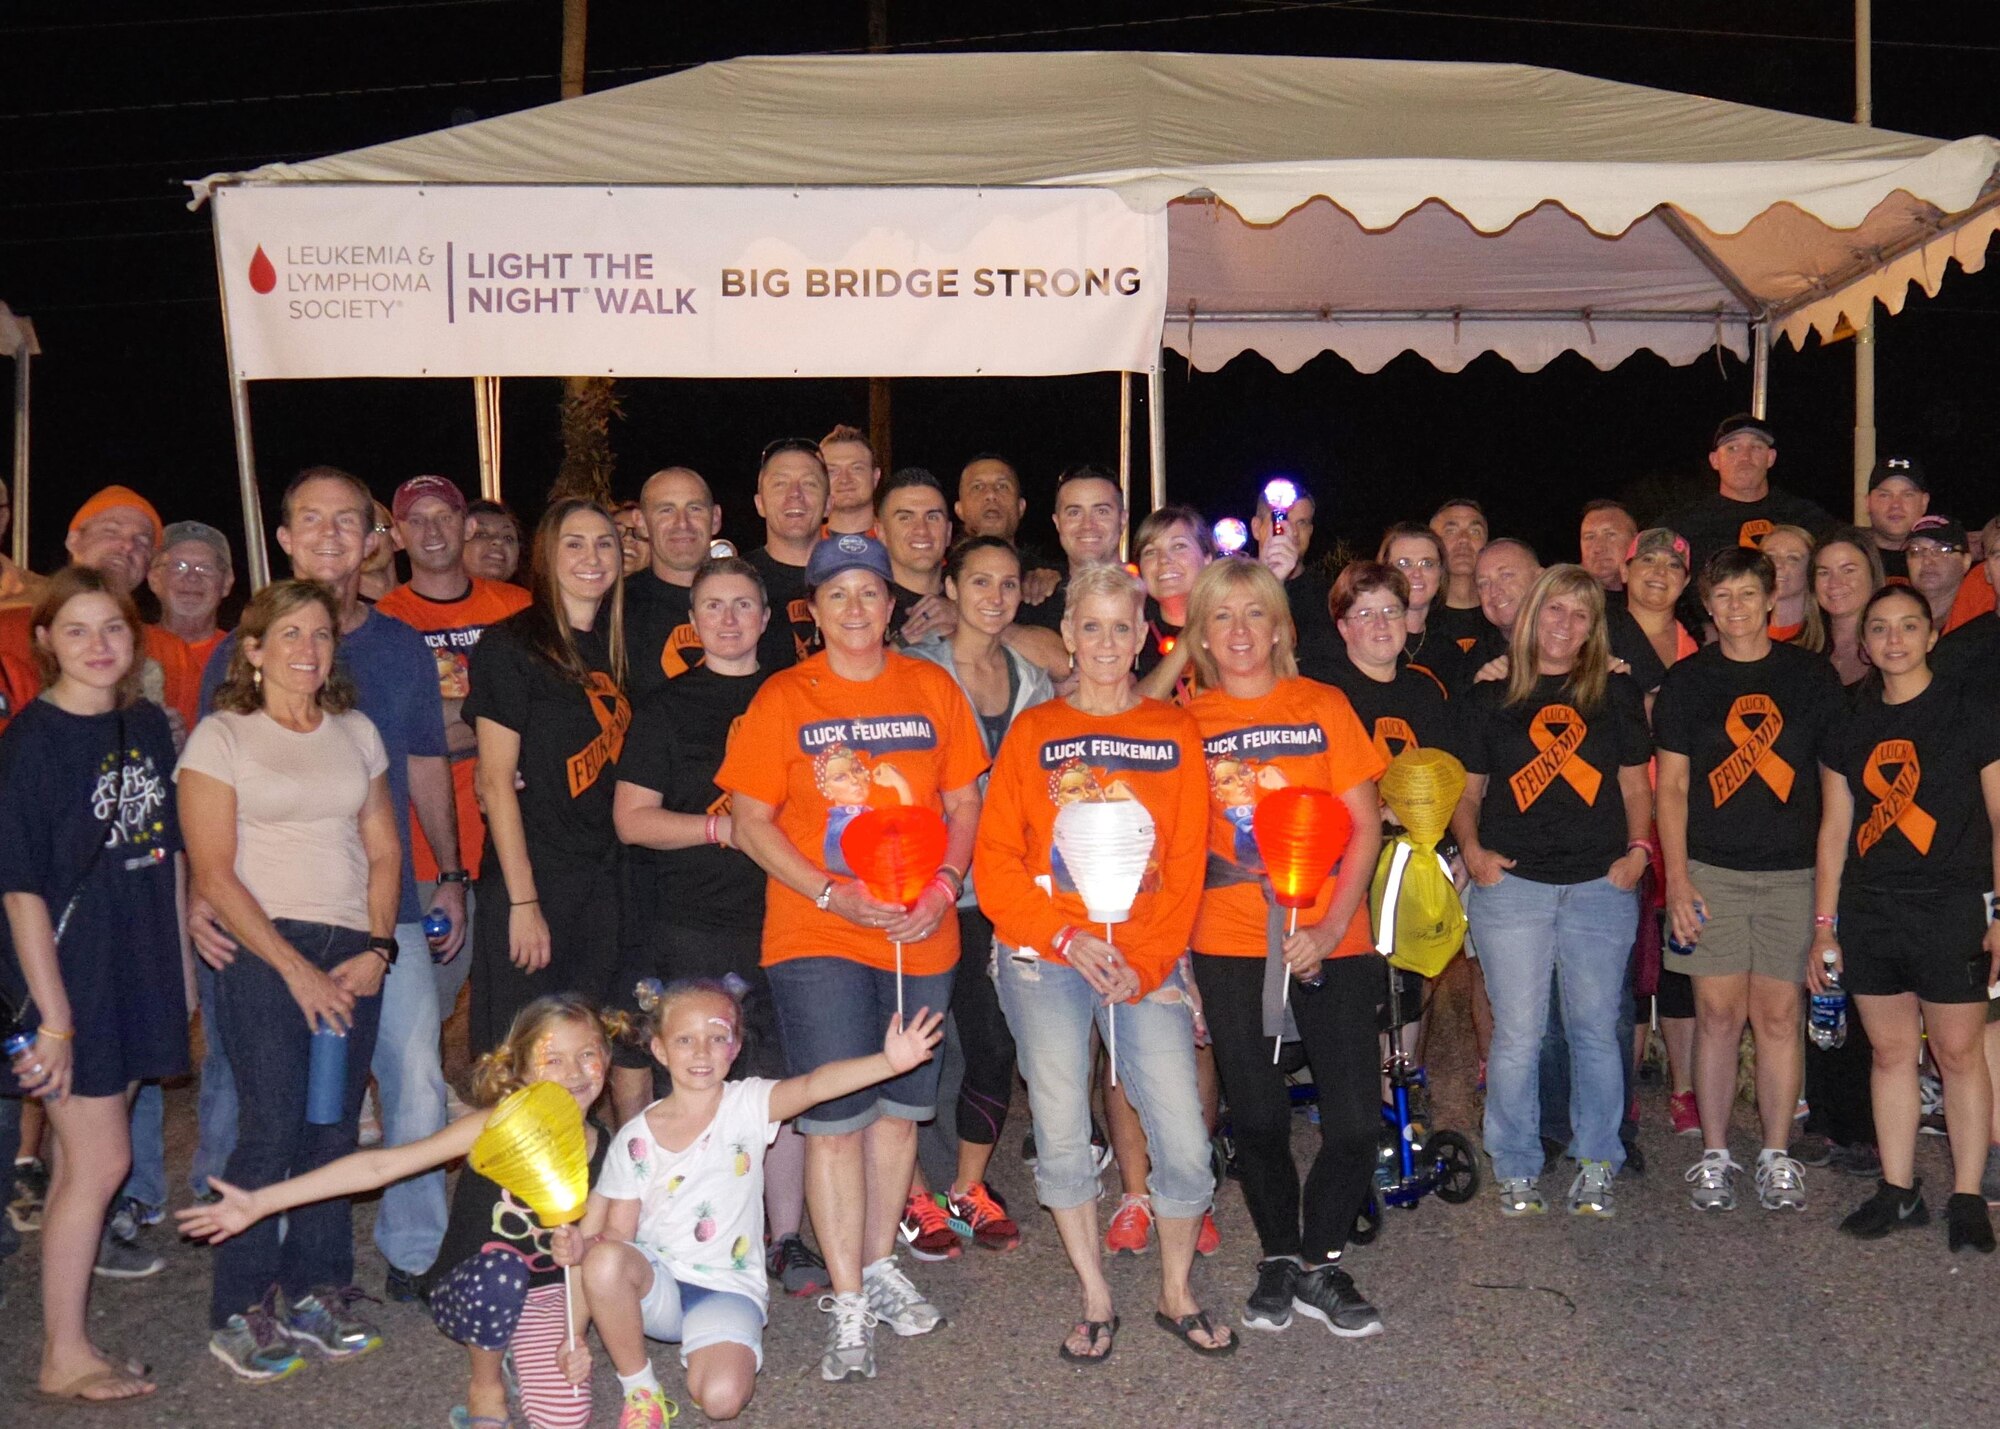 Bridget Alcocer, mother of Tech. Sgt. Francisco Alcocer, 944th Security Forces Squadron combat arms NCO-in-charge, and Airmen from the 944 SFS, participate in a group photo during the Light the Night walk event Nov. 5 to help raise money for the Leukemia Lymphoma Society in Phoenix, Ariz. (Courtesy photo)